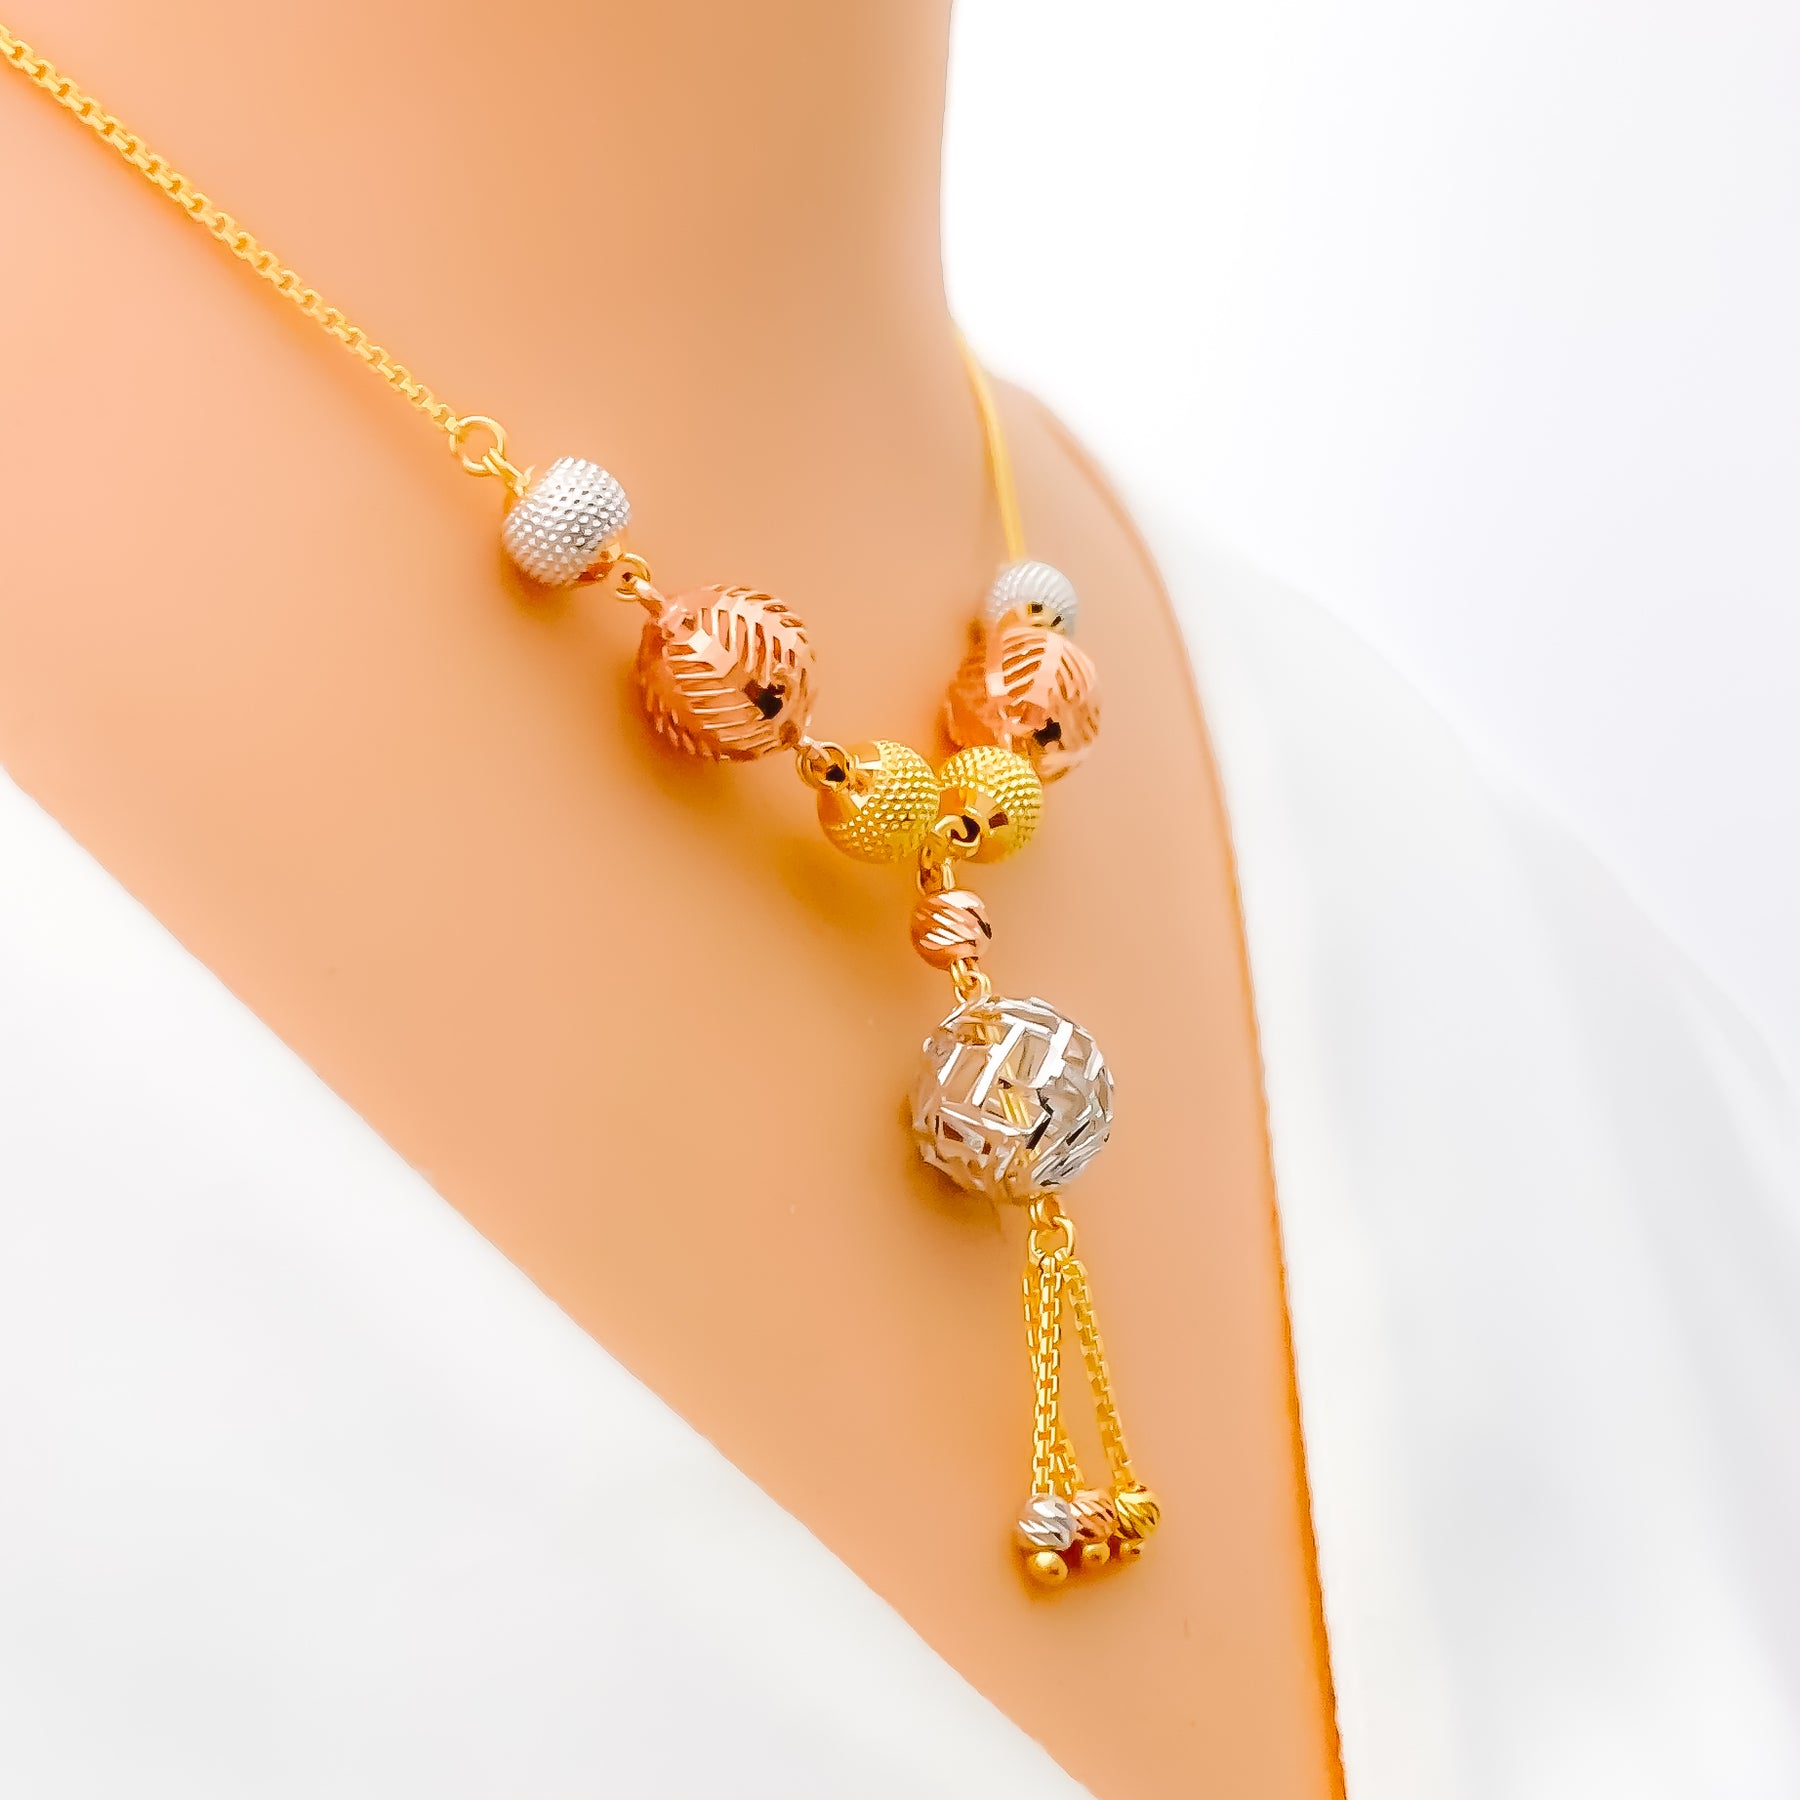 22K Gold Necklace For Women with Culture Pearls - 235-GN3922 in 25.250 Grams